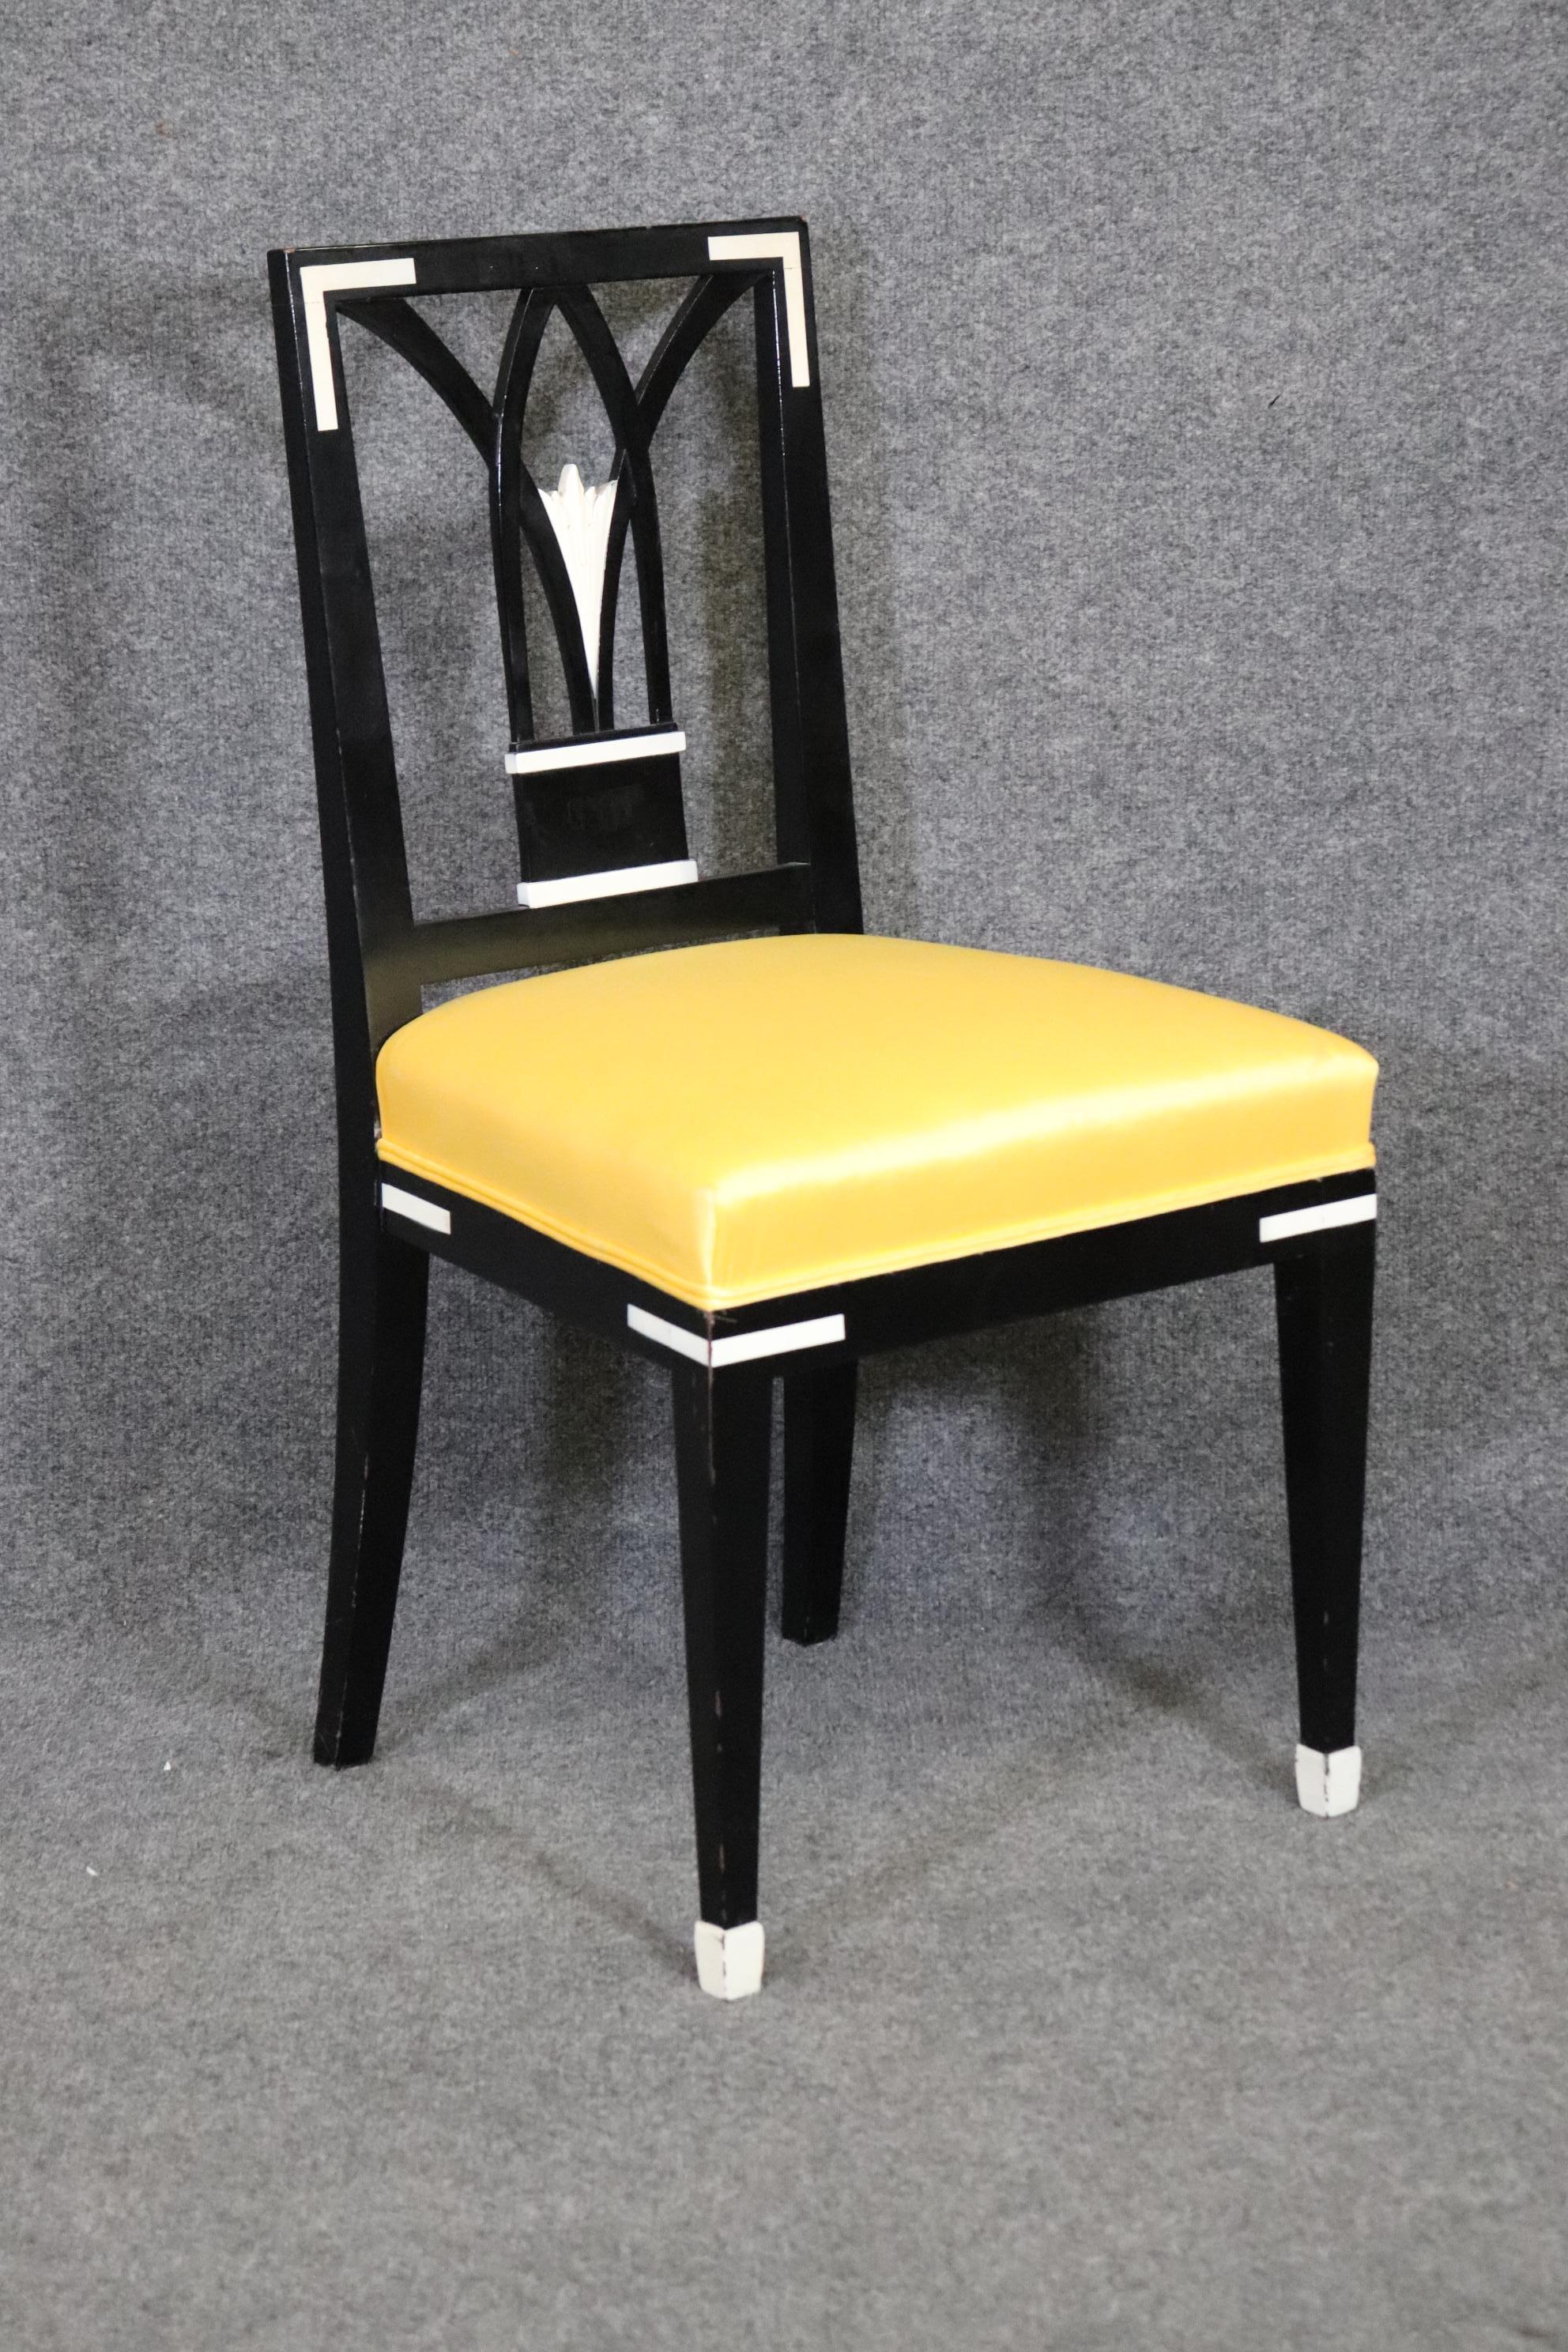 This is a beautiful set of chairs done in the Art Deco style with faux paint decorated ivory inlay. The inlay looks exactly like ivory but is painted not actual ivory nor inlay. But it looks so good you'll be hard-pressed to tell the difference. The